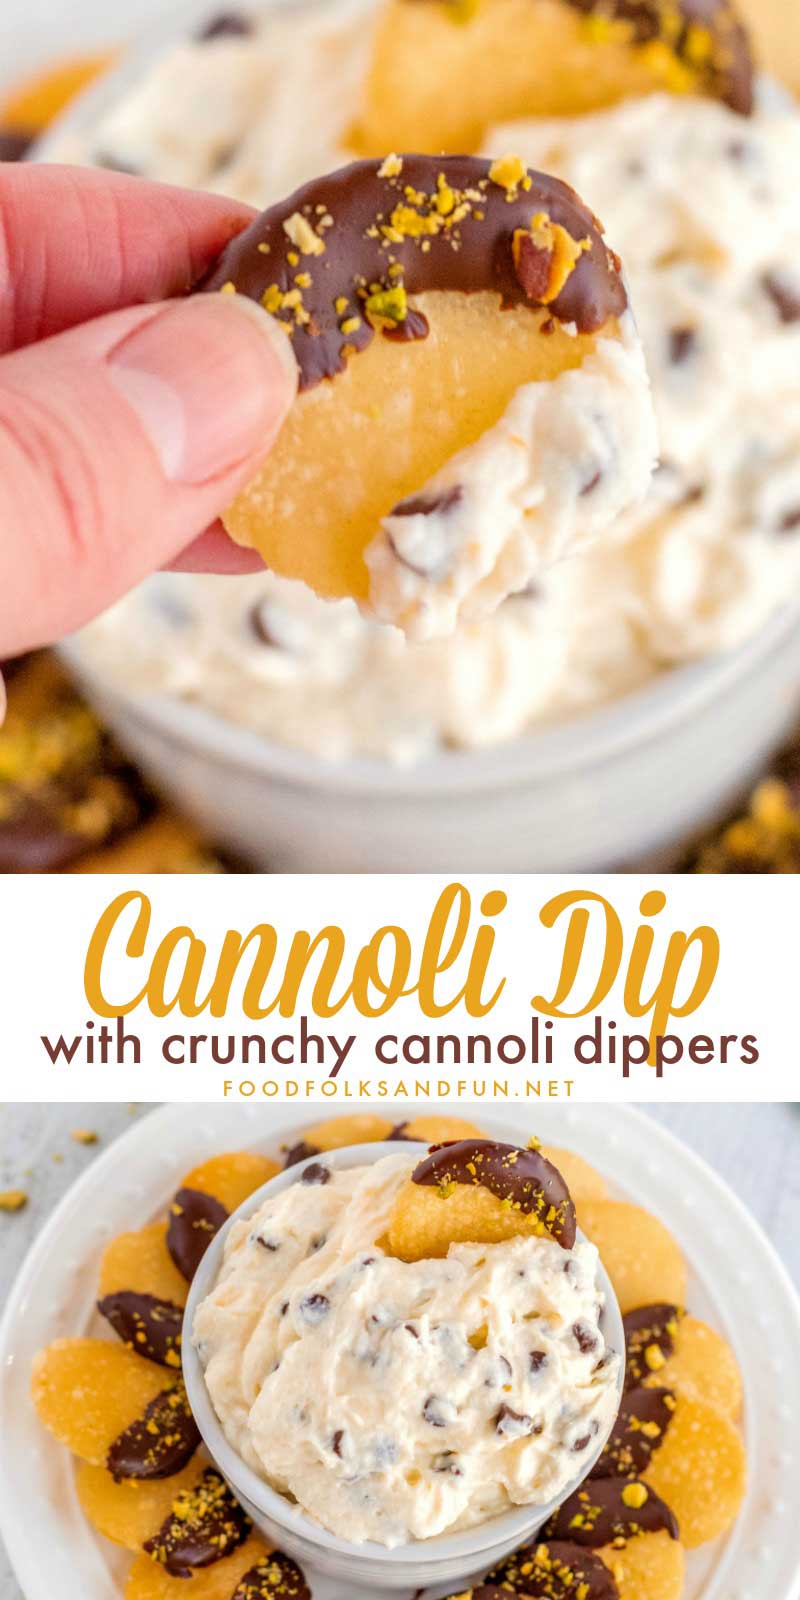 This easy Cannoli dip is made with whipped cream, ricotta cheese, cream cheese, powdered sugar, mini chocolate chips, vanilla, and orange zest. Its served with delectable chocolate and pistachio-covered dippers.  via @foodfolksandfun